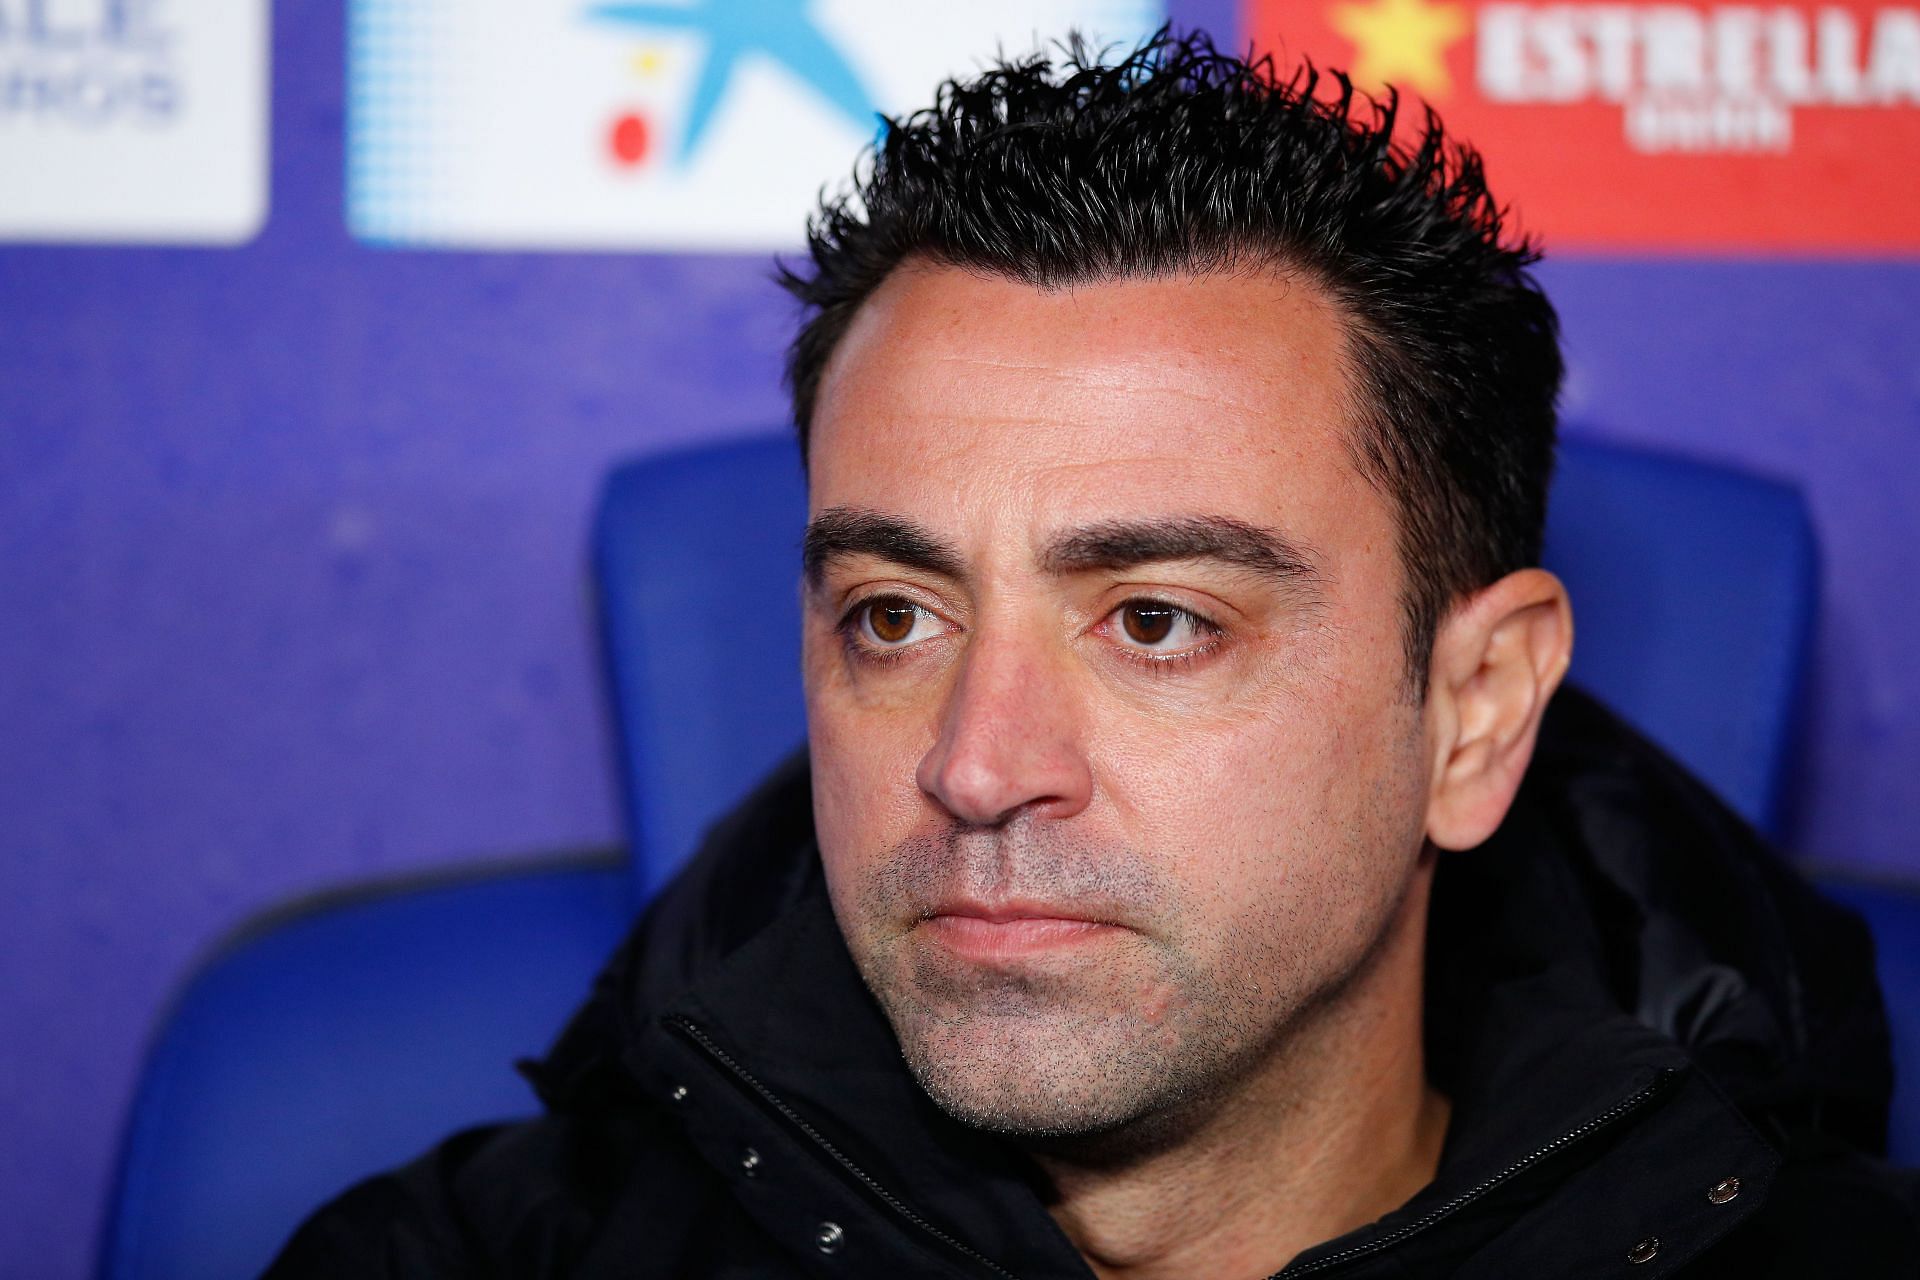 Xavi revealed to have joined the Bavarians in 2008